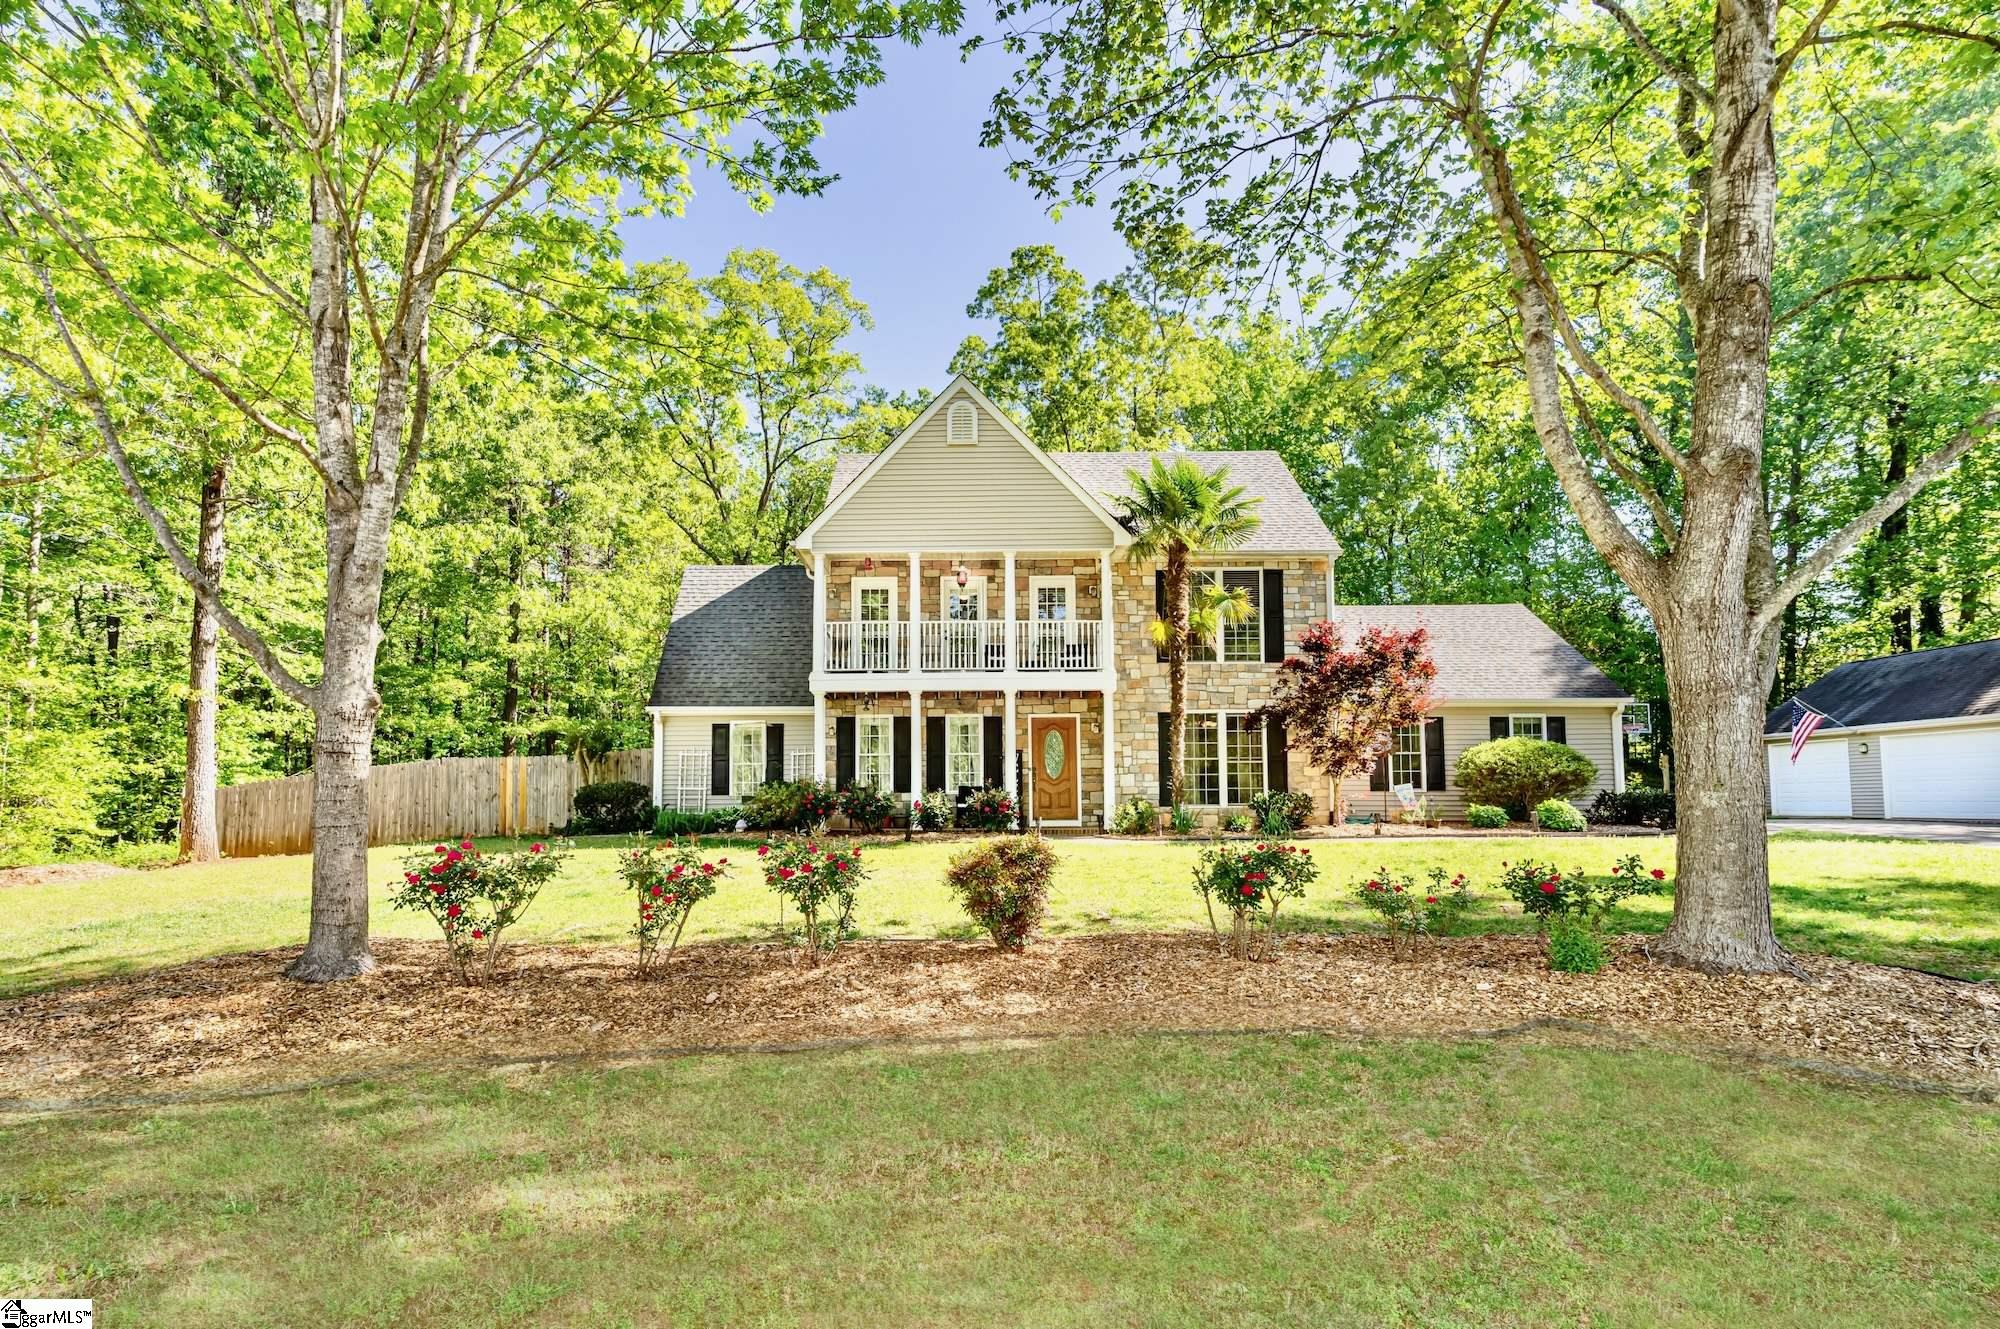 This is a breath taking view of the entire front yard and it's beautiful landscaping. You will enjoyed many days of fresh country air with peace and quiet in the settle community.